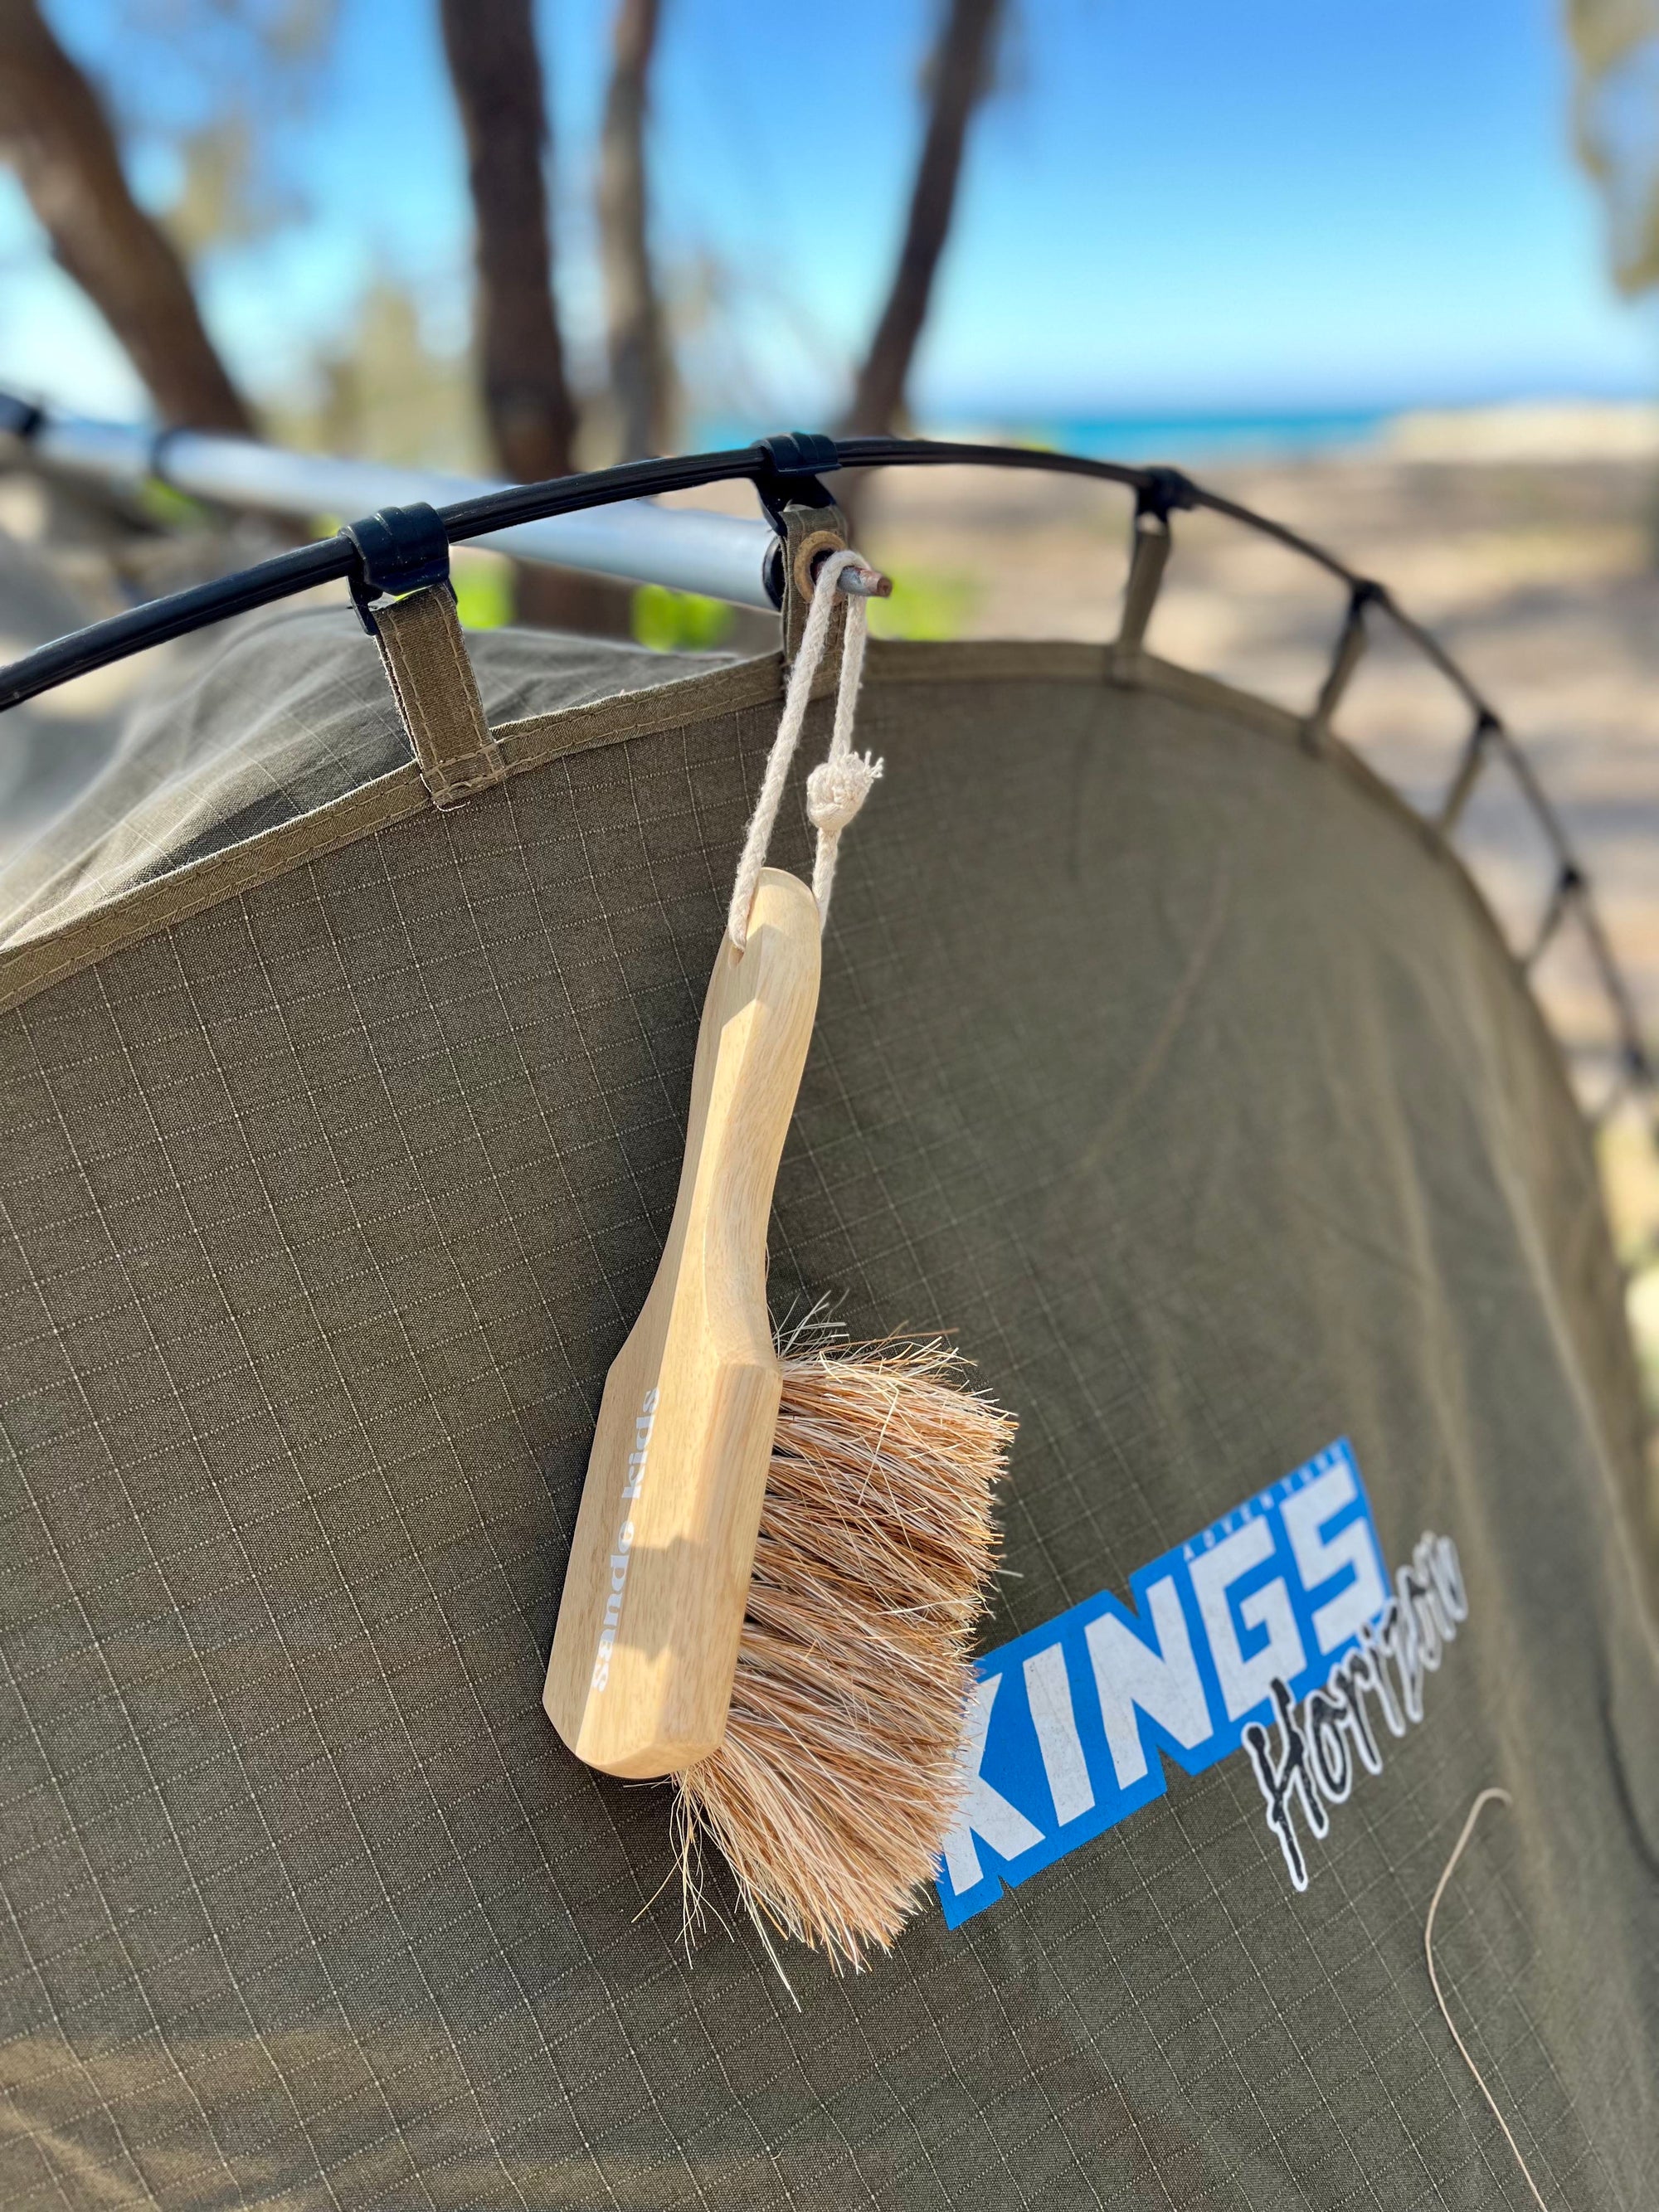 Shop our range of eco-friendly camping essentials including sand removal brushes, eco-friendly sunscreen, natural insect repellents, throw blankets, towels, cooler bags + more! - Sunny Bliss - Australia